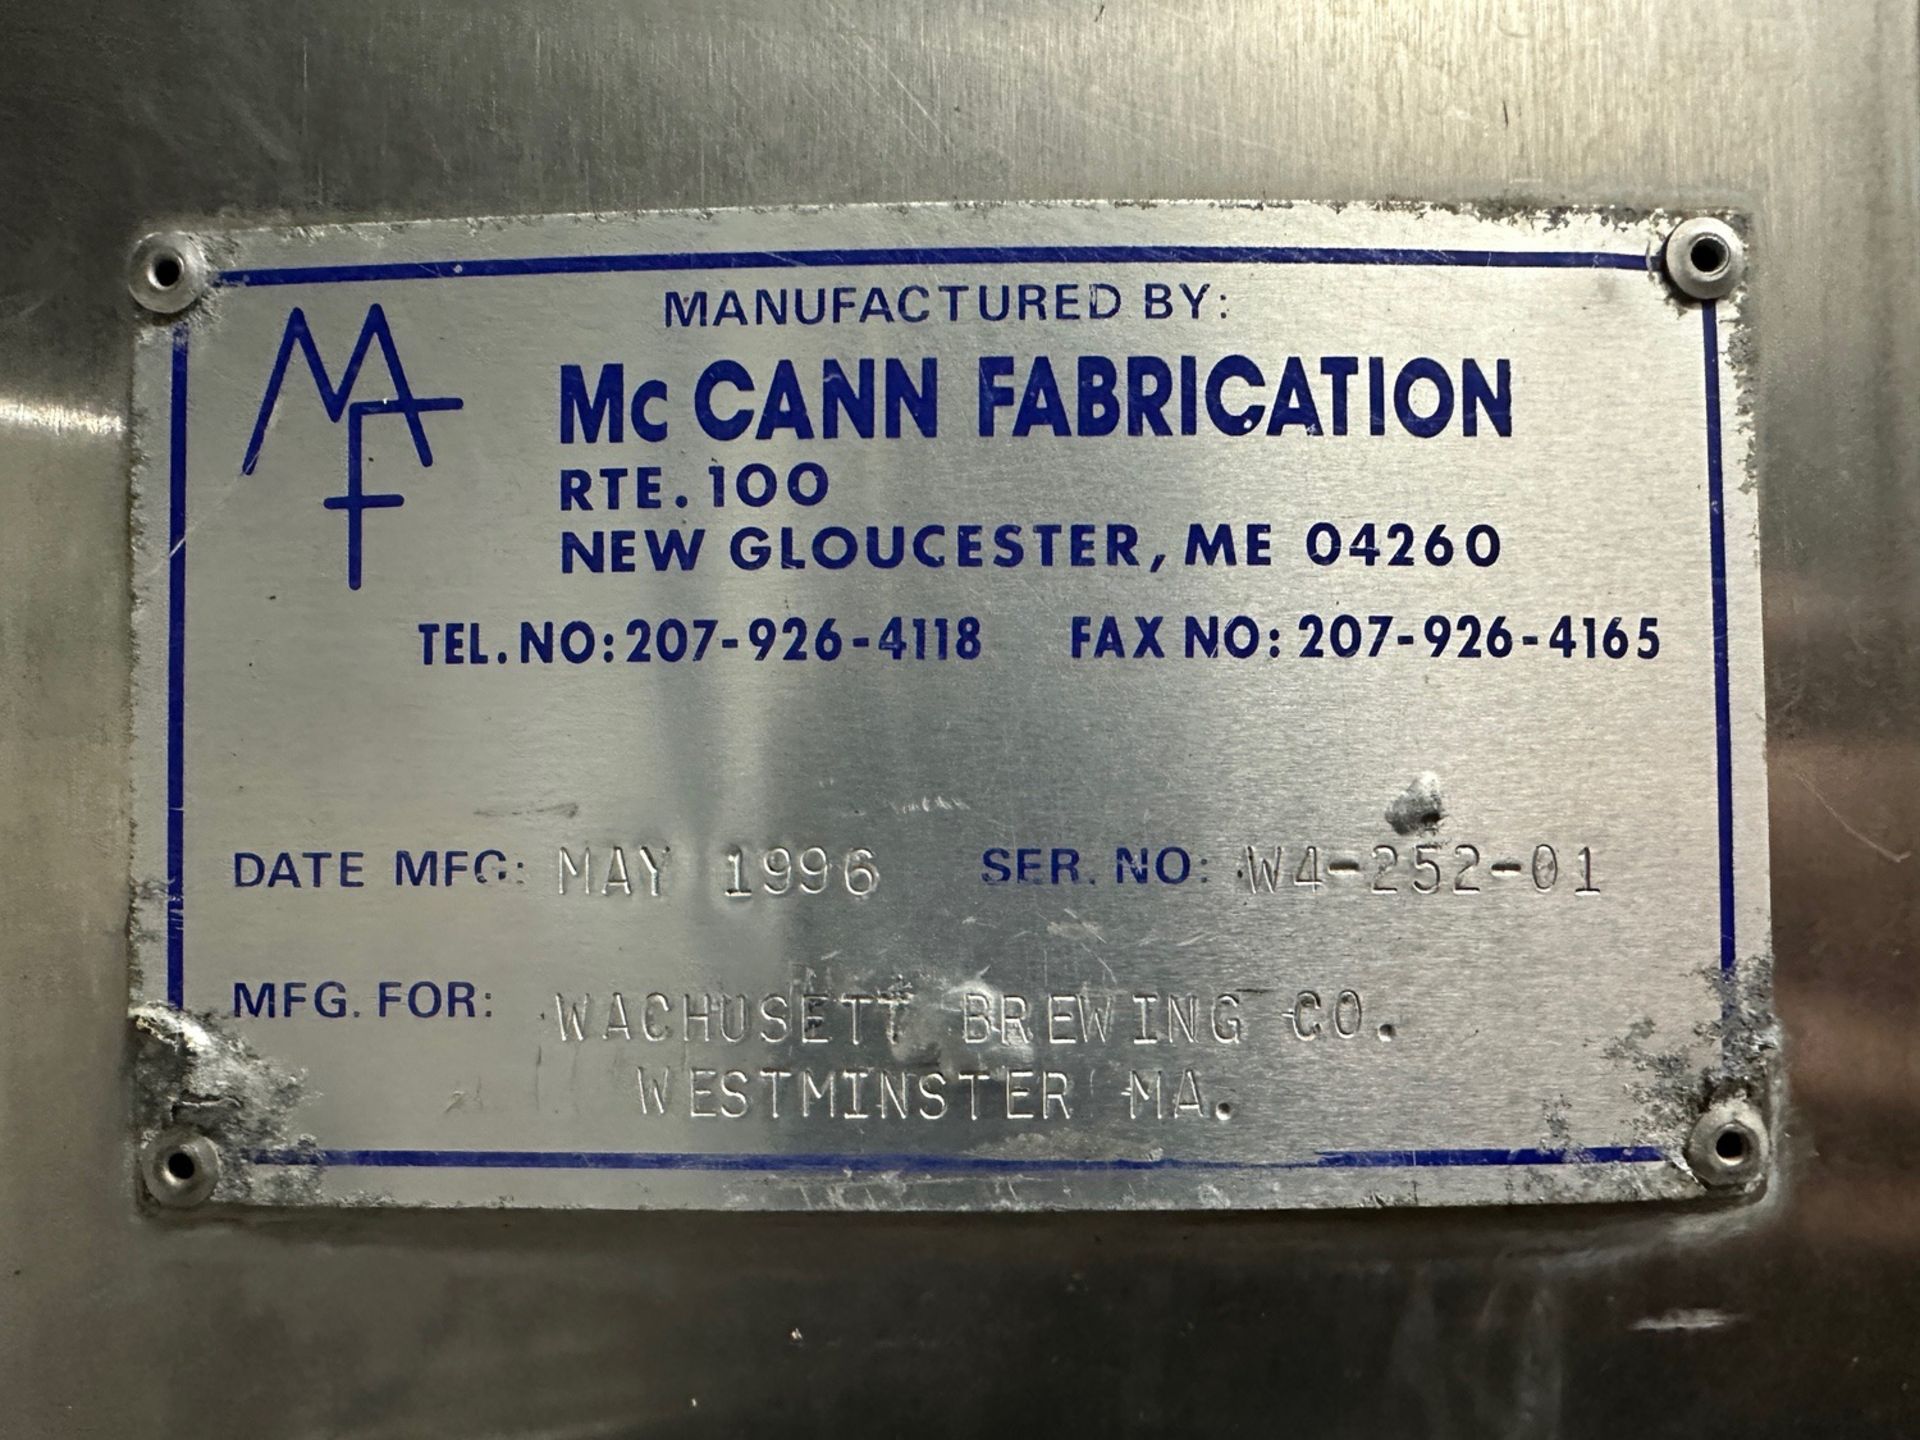 McCann 70 BBL Stainless Steel Fermentation Tank (F3) - Cone Bottom, Glycol Jacketed | Rig Fee $1400 - Image 2 of 4